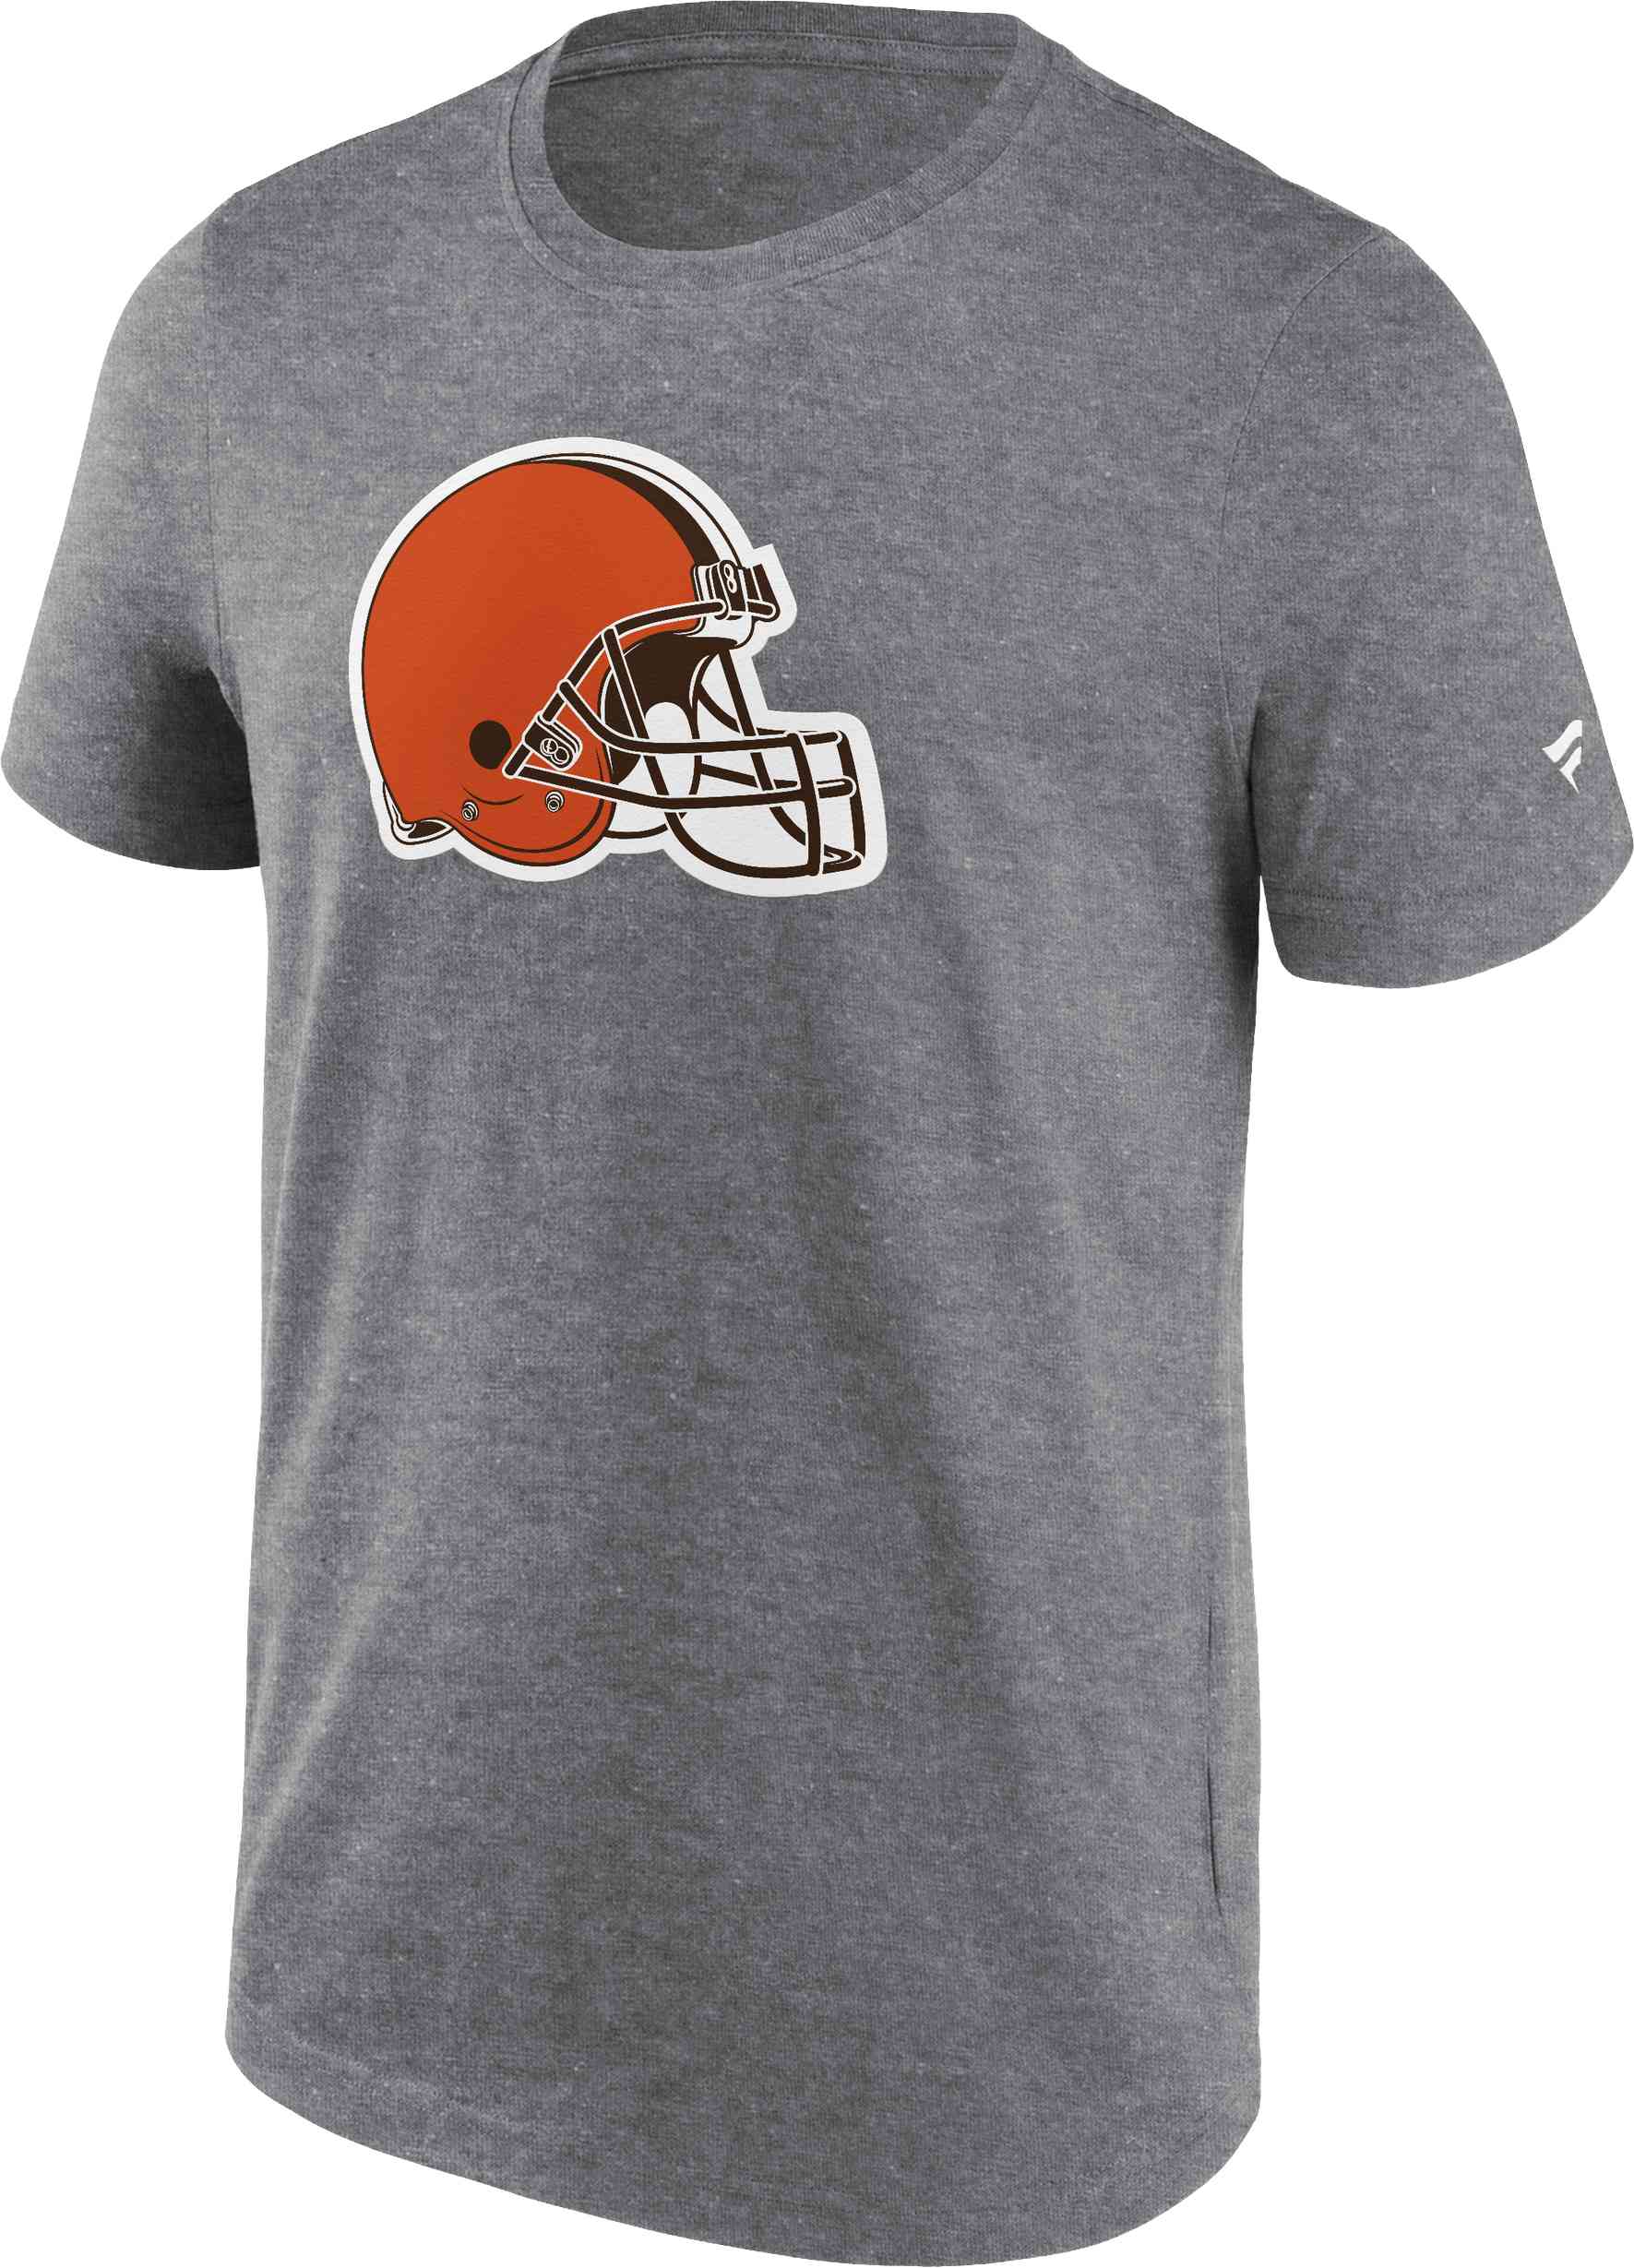 Fanatics - NFL Cleveland Browns Primary Logo Graphic T-Shirt